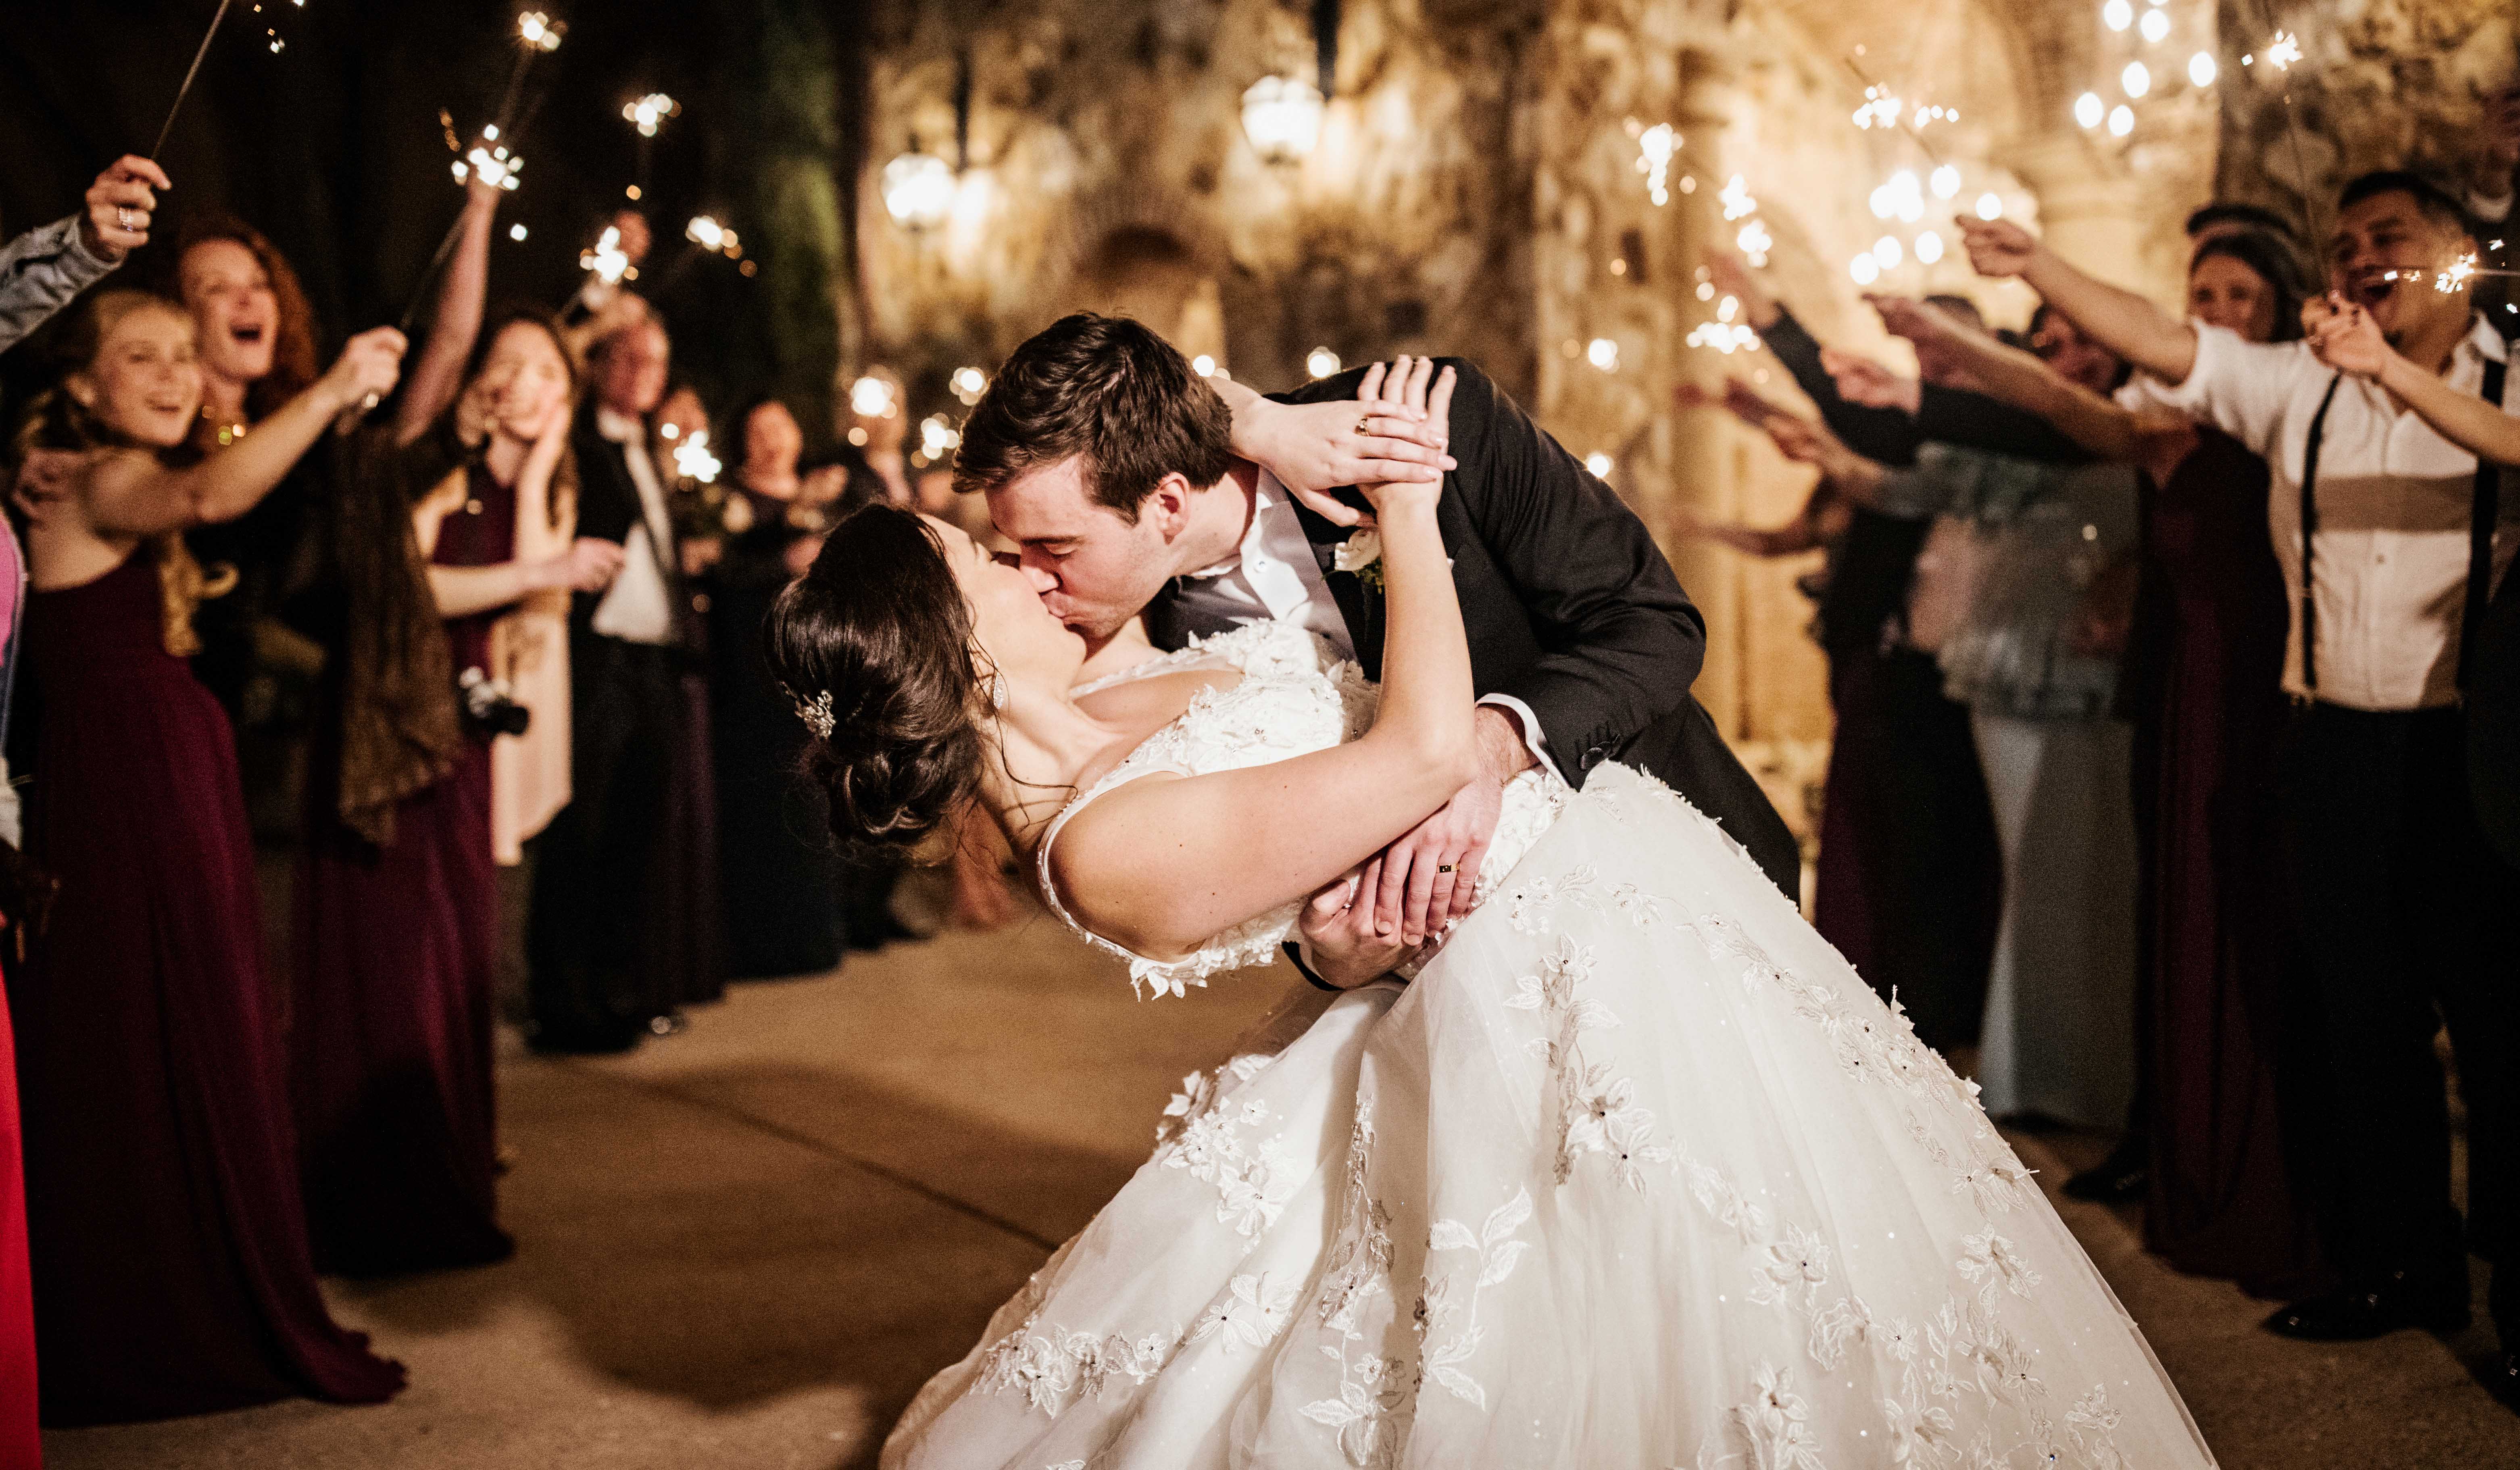 5 Meaningful Ways to End Your Wedding